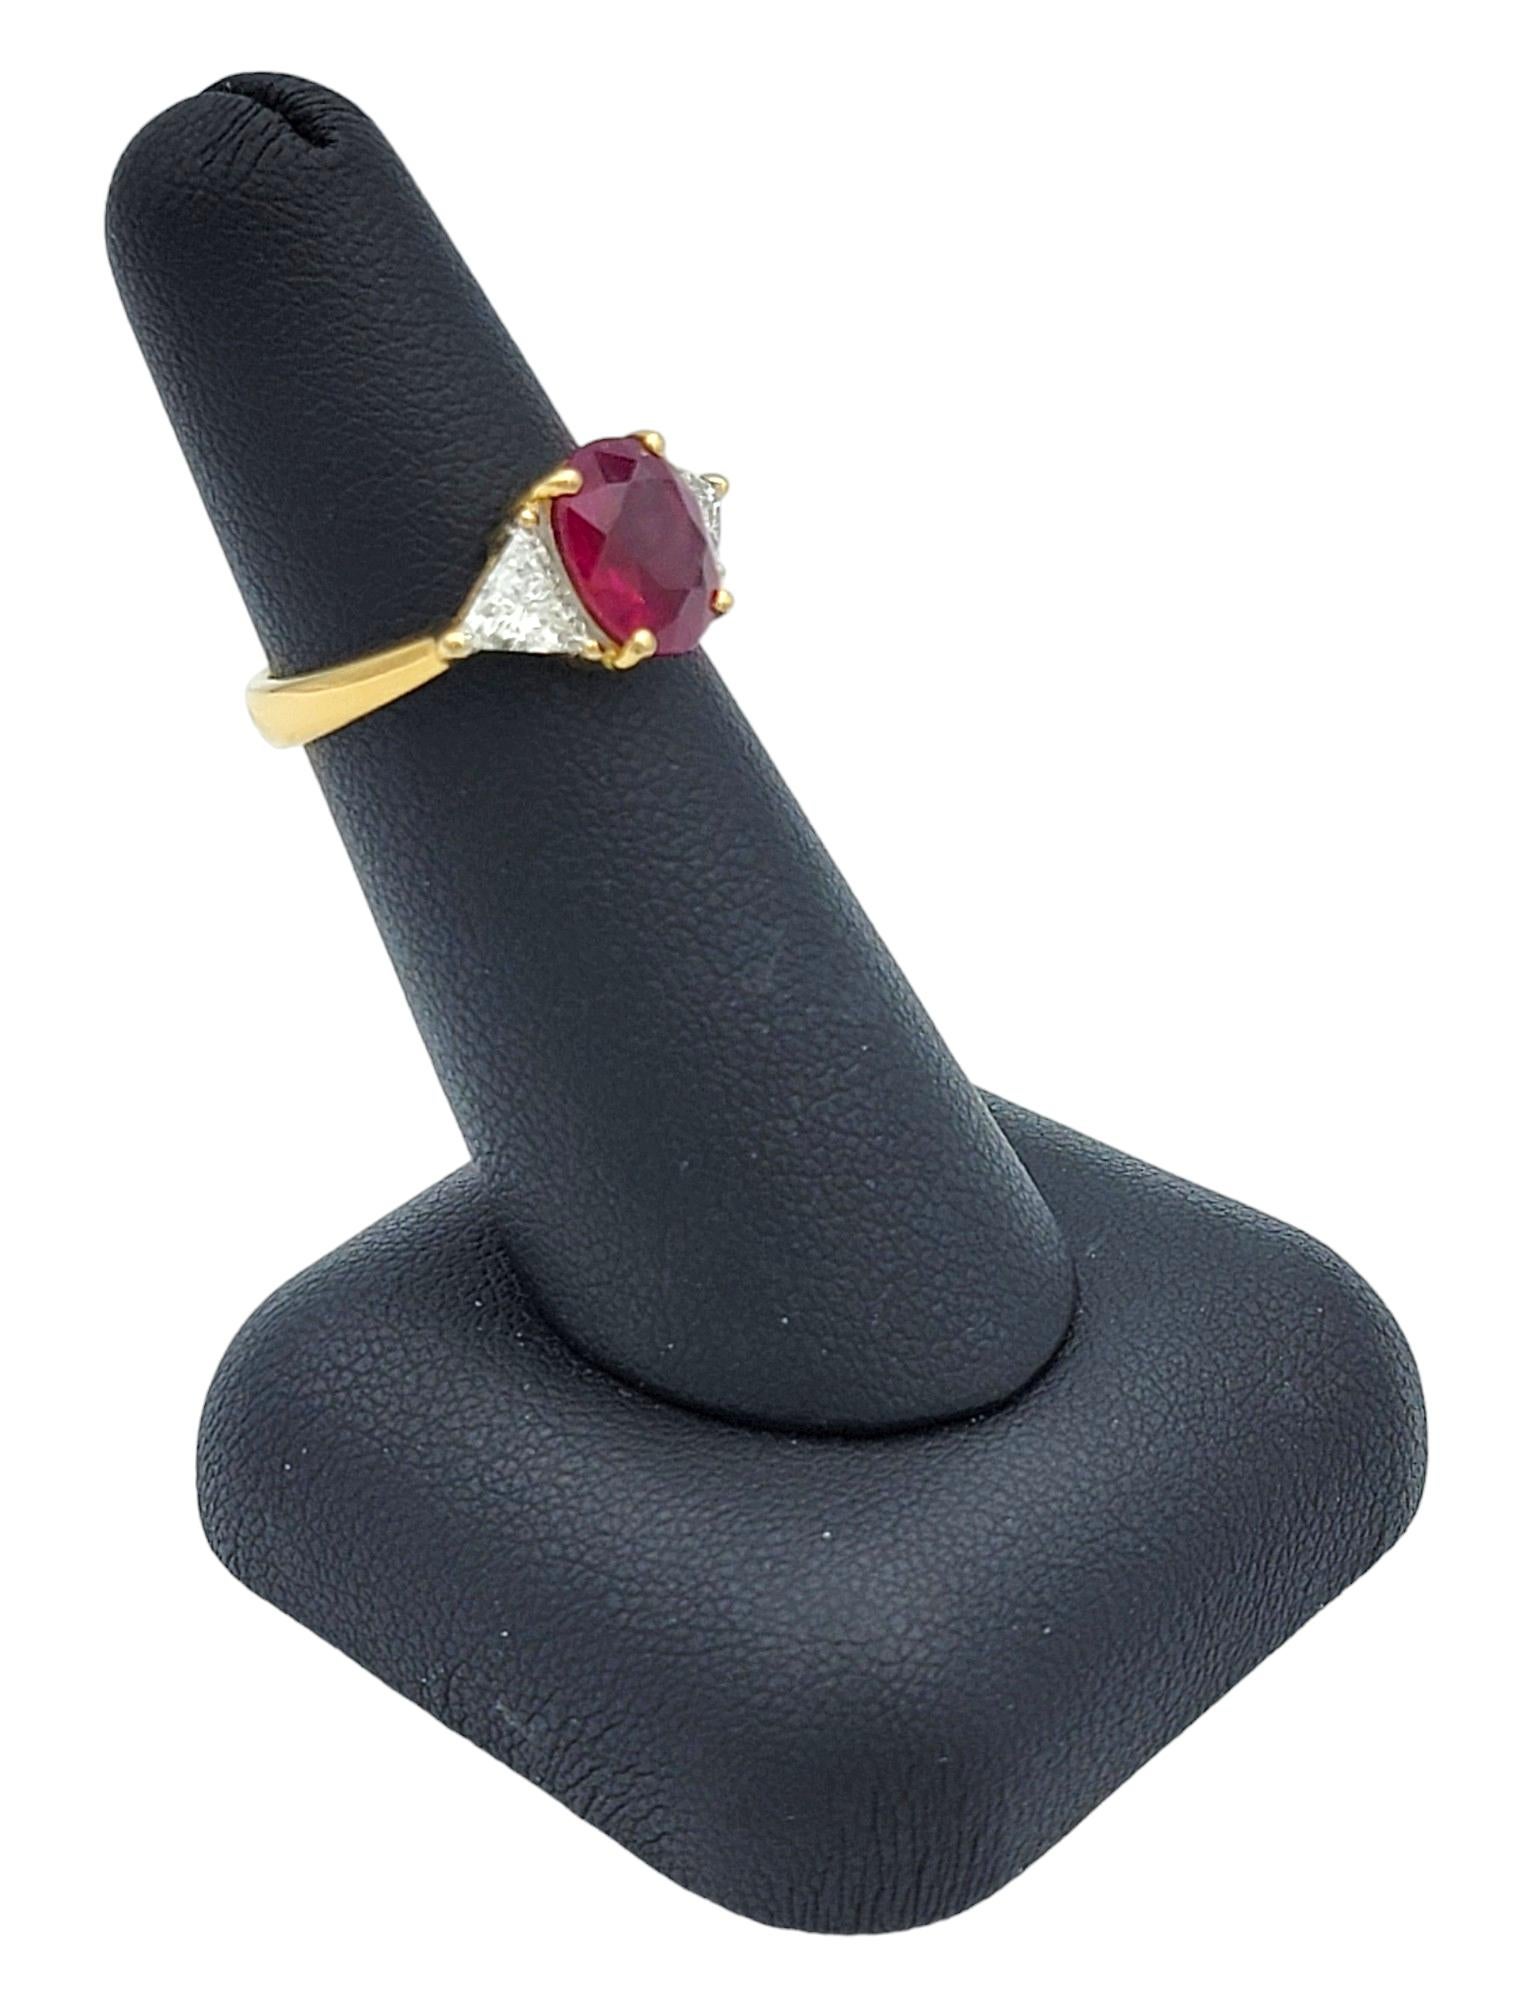 Rare Natural Oval Cut Burma Ruby and Trillion Diamond Ring 18 Karat Yellow Gold For Sale 6